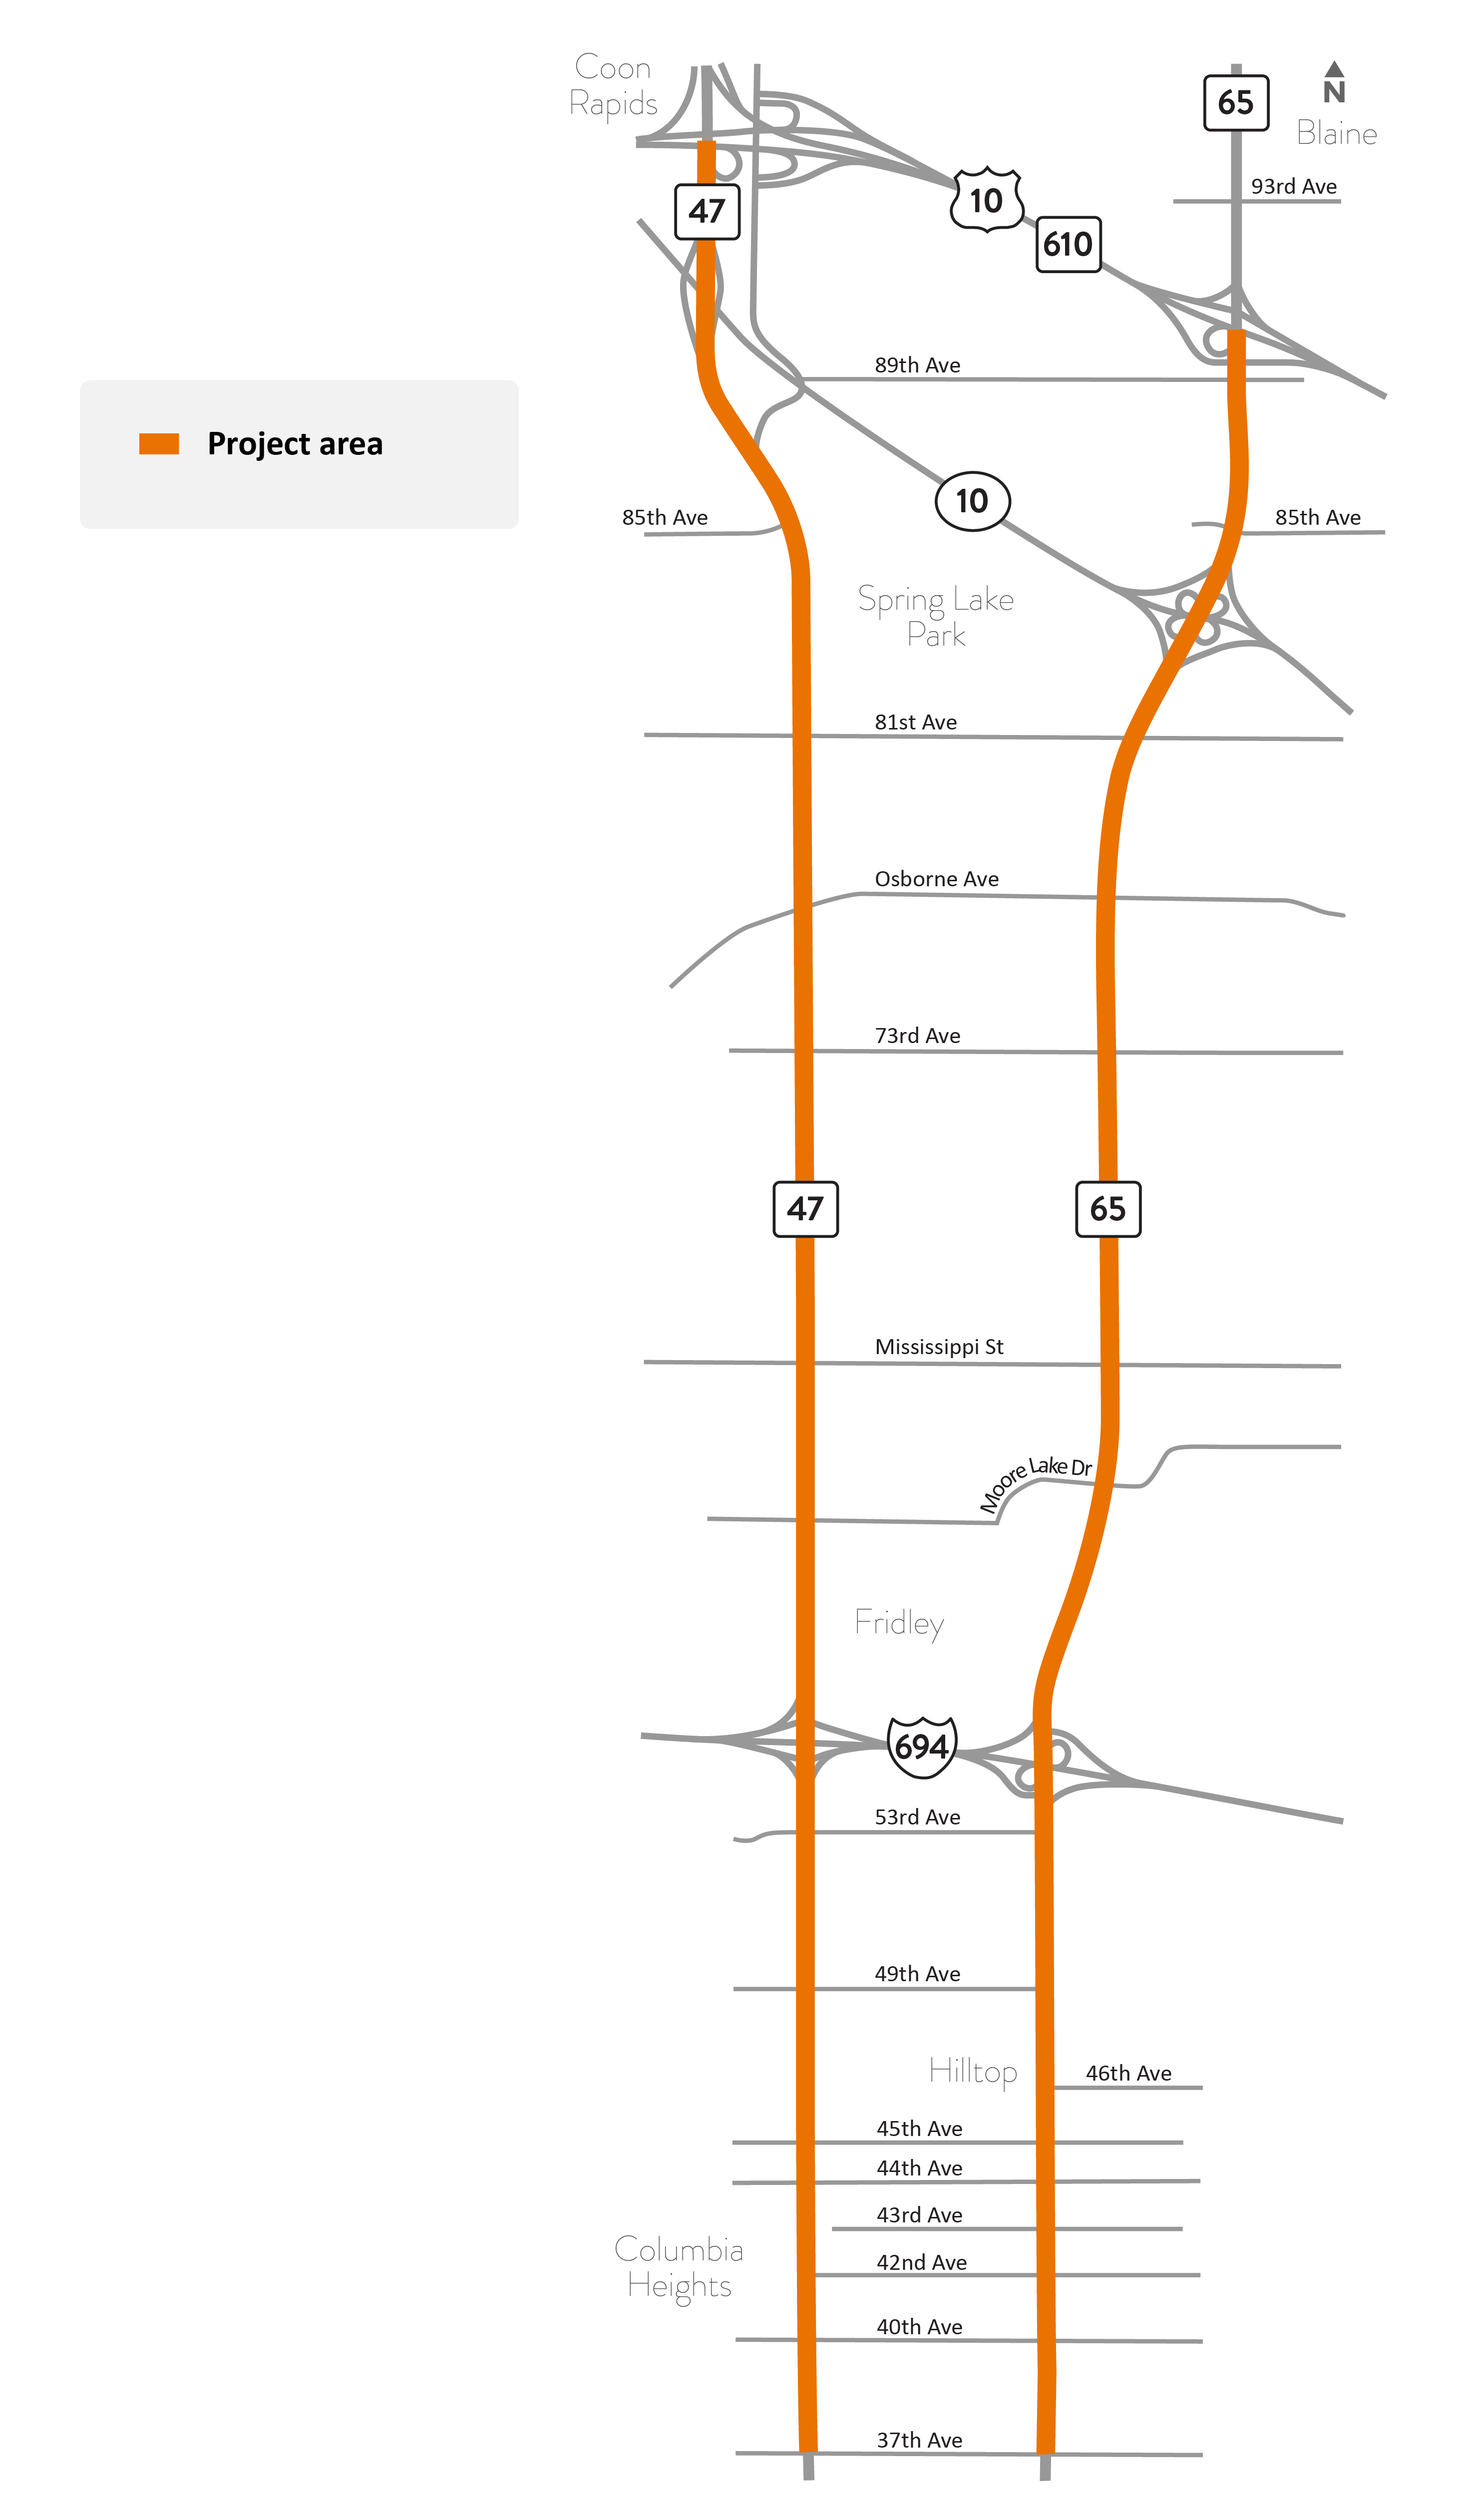 Highway 47 and highway 65 project area map from the Hennepin-Anoka County line in Columbia Heights to Hwy 10 in Coon Rapids